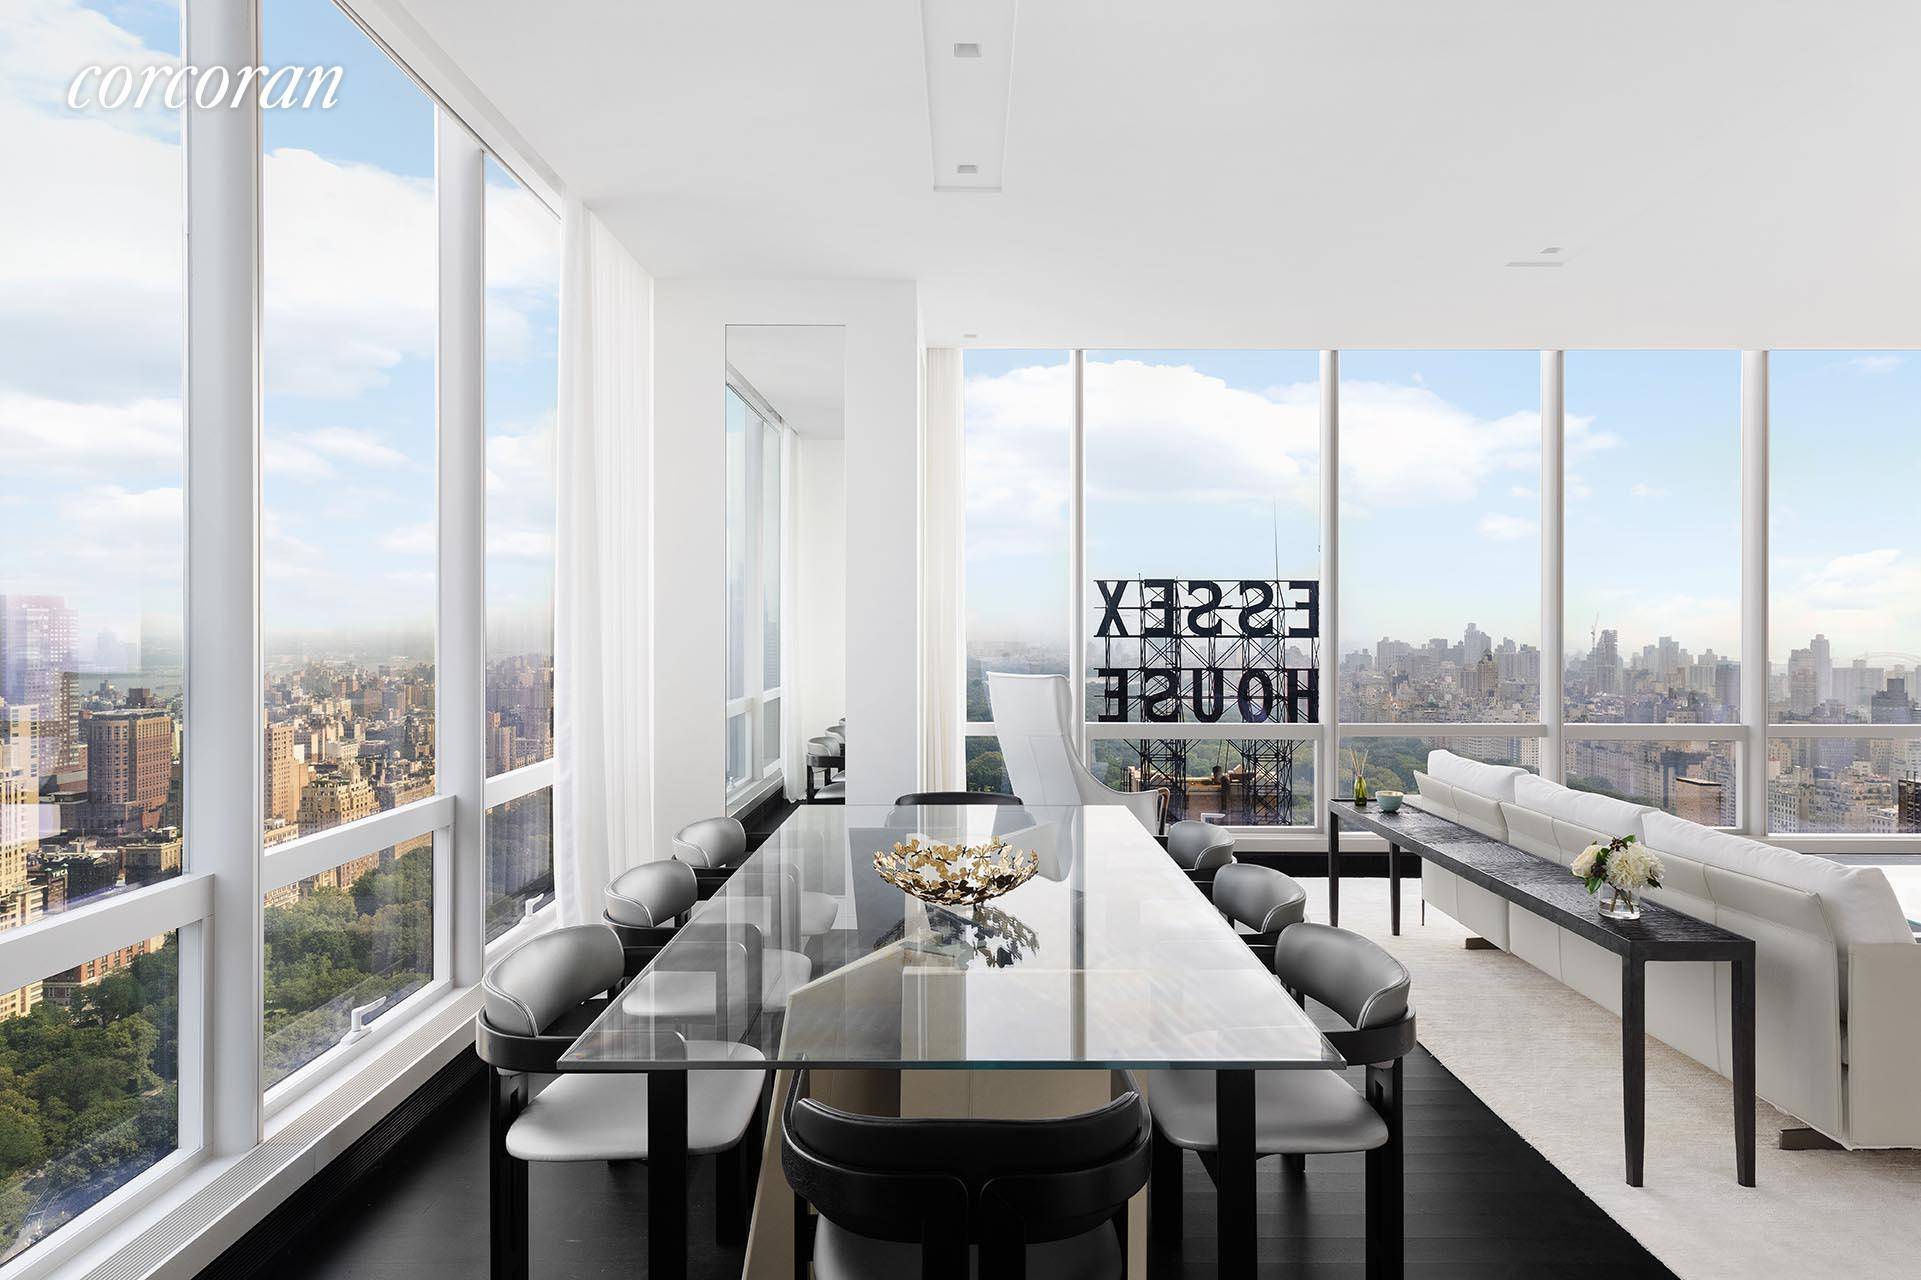 Residence 50A at One57Incomparable Central Park Views and DesignThree Bedrooms Three Baths Powder Room 3, 228 sqftThis 50th floor A line residence at One57 offers spectacular views of Central Park ...